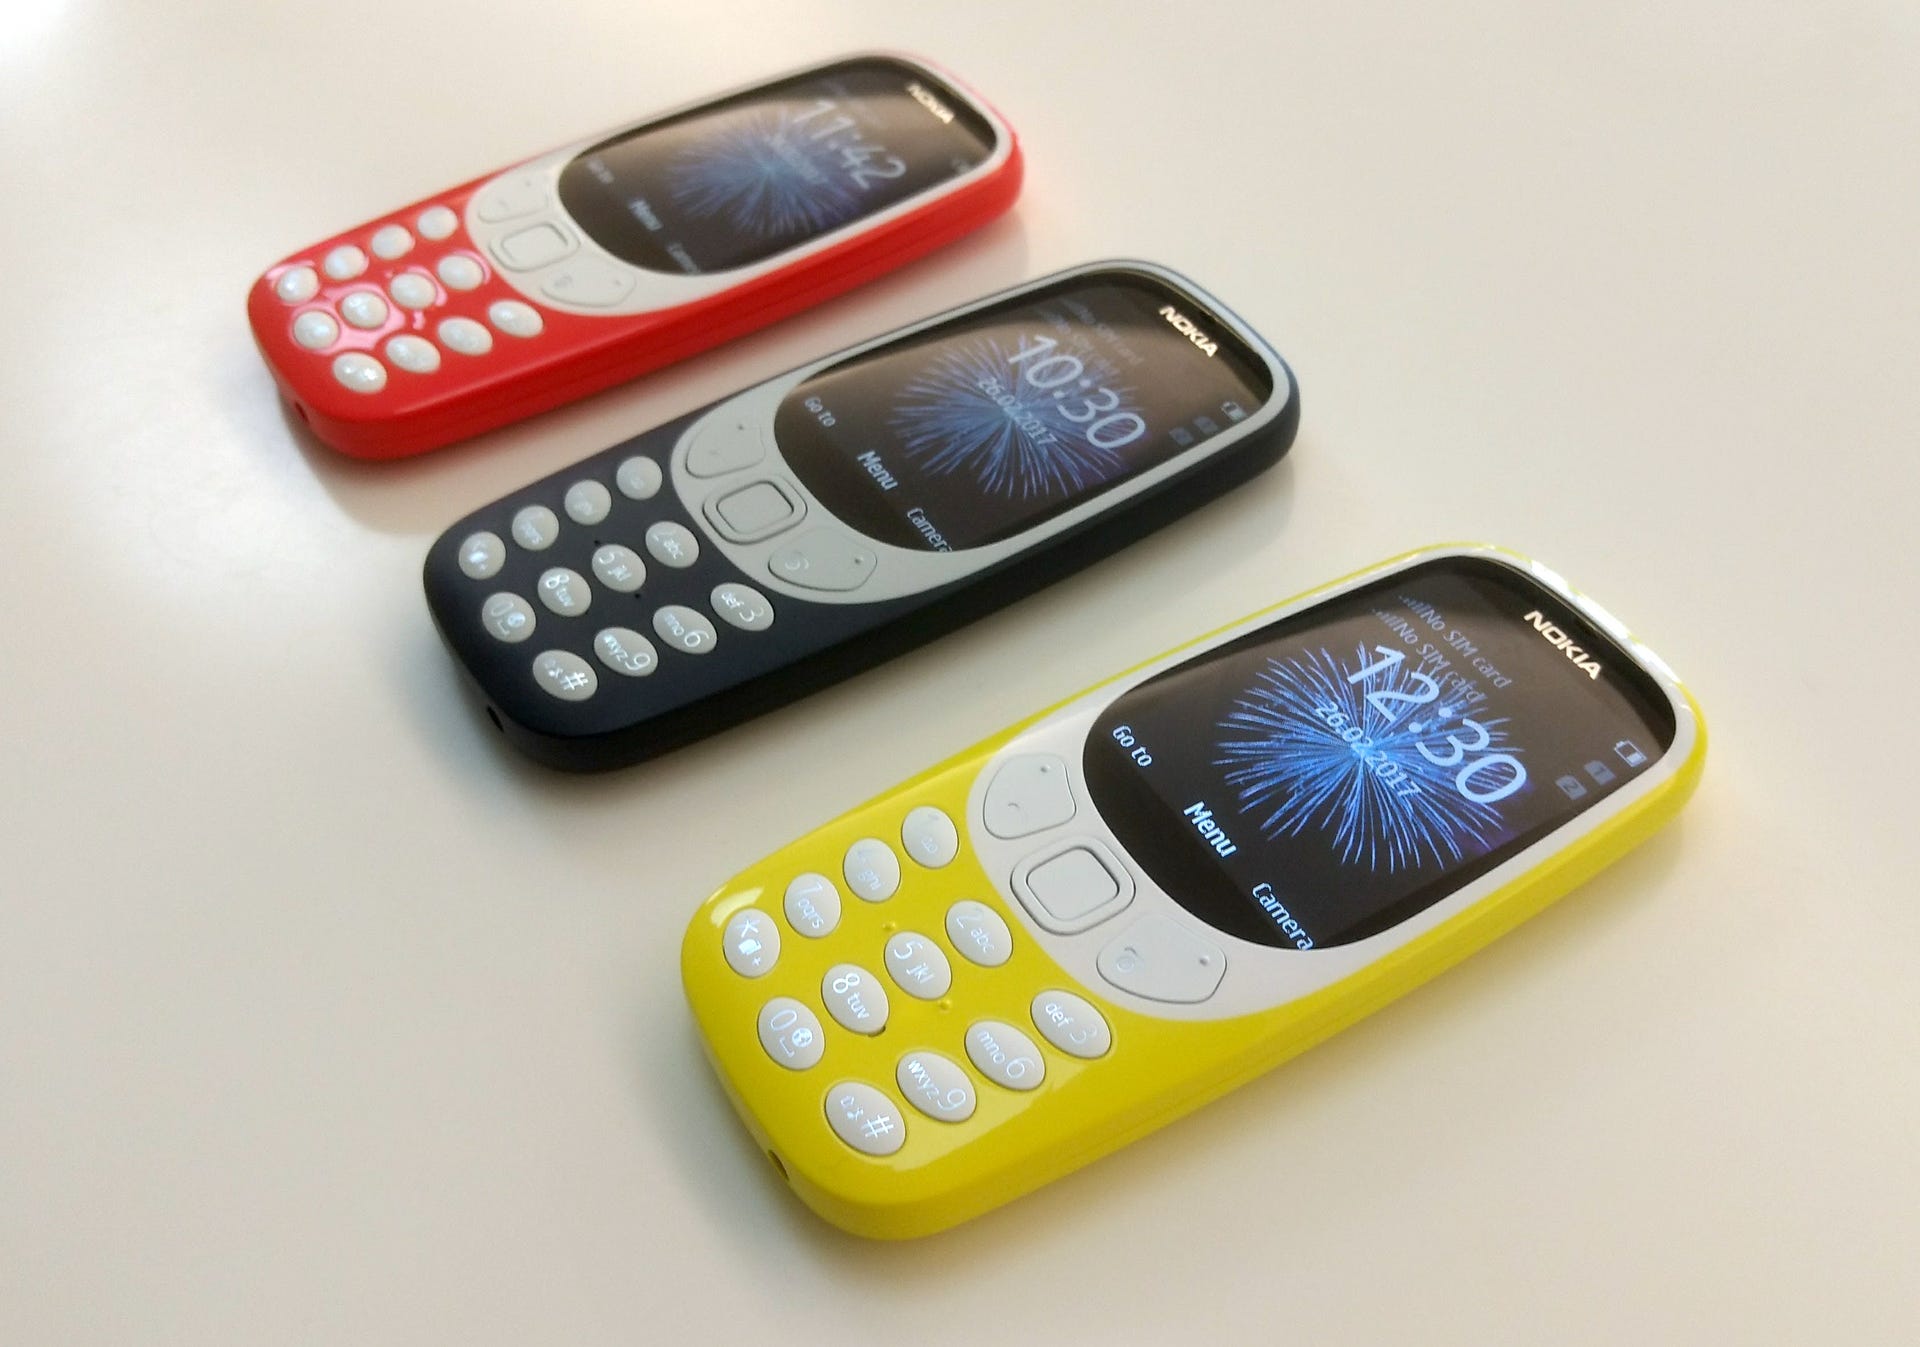 The new-look Nokia 3310 on sale this month - CNET